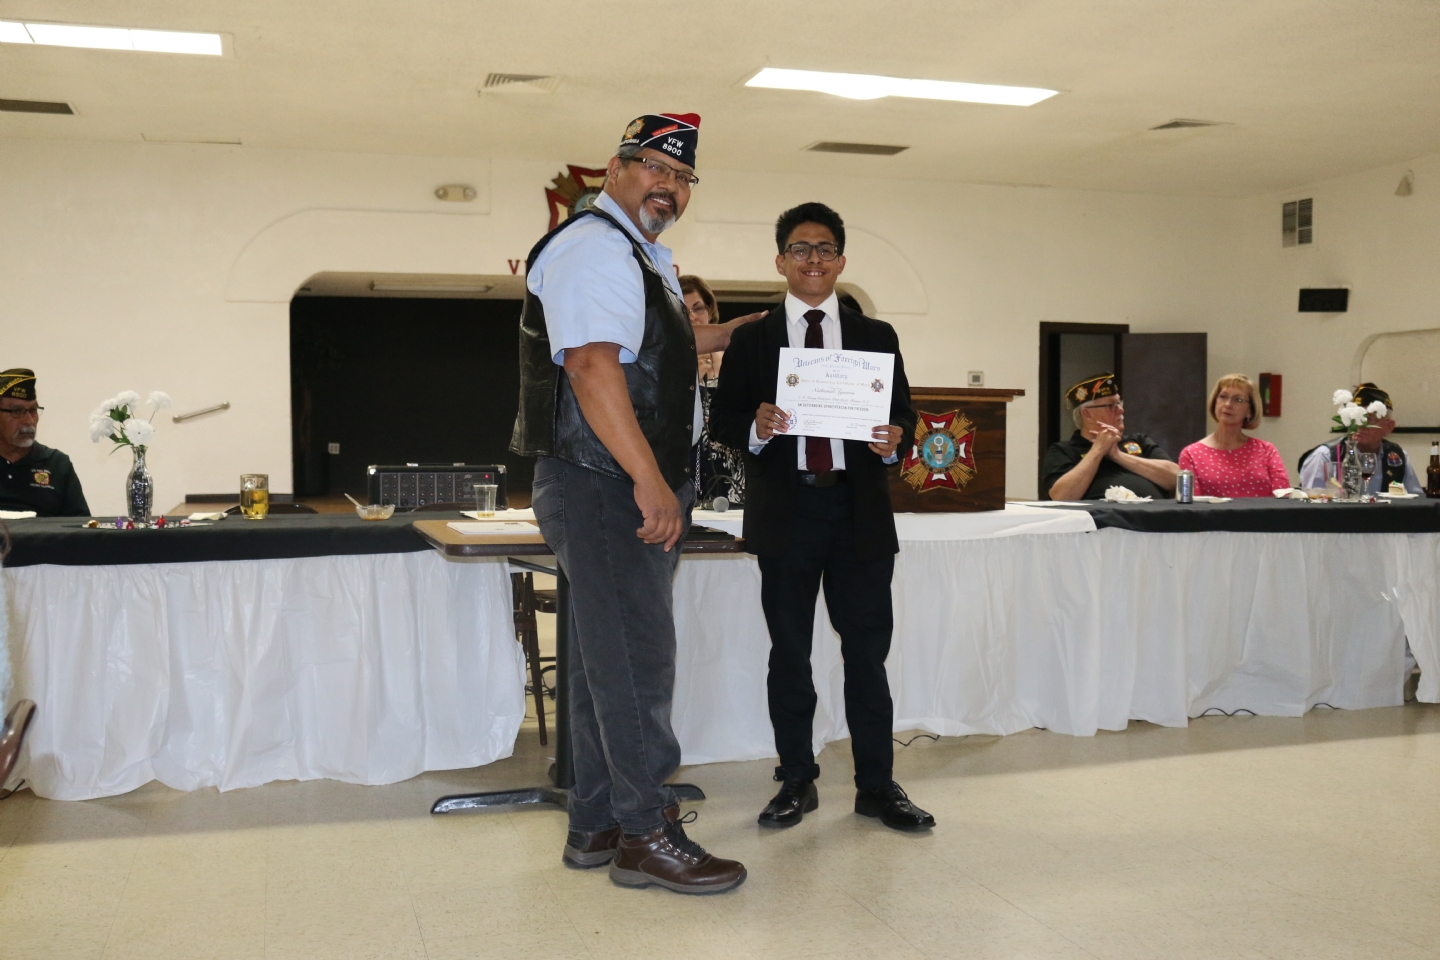 Commander Fernandez presents Nathanial Argueros, the winner of the annual Voice of Democracy essay contest.